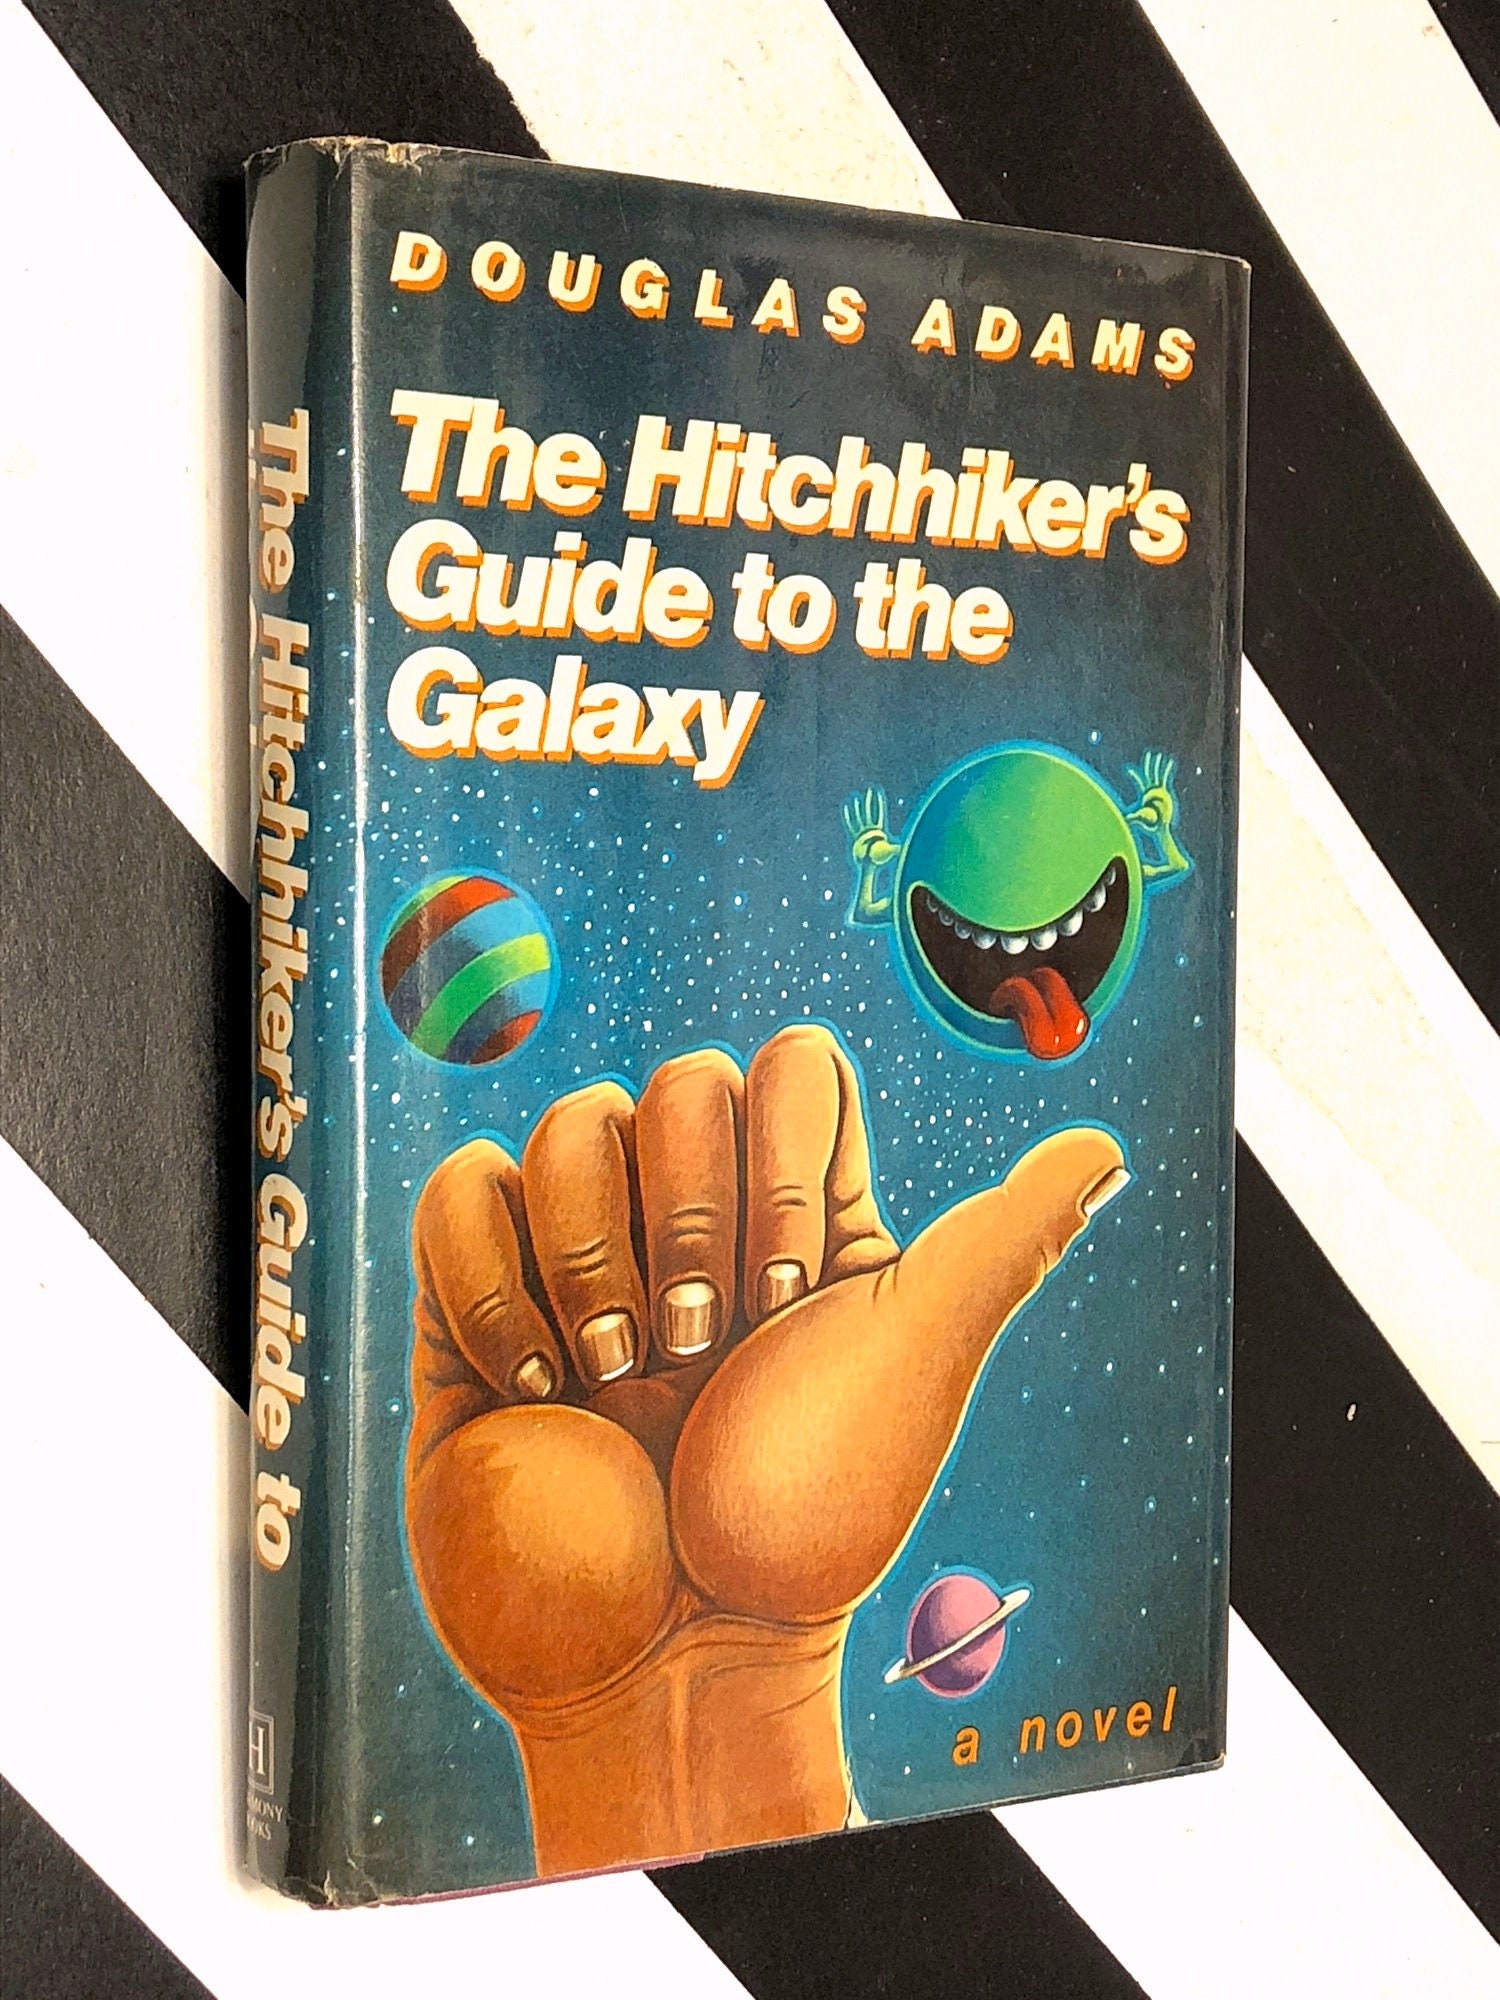 The Hitchhiker's Guide to the Galaxy by Douglas Adams (1979) first